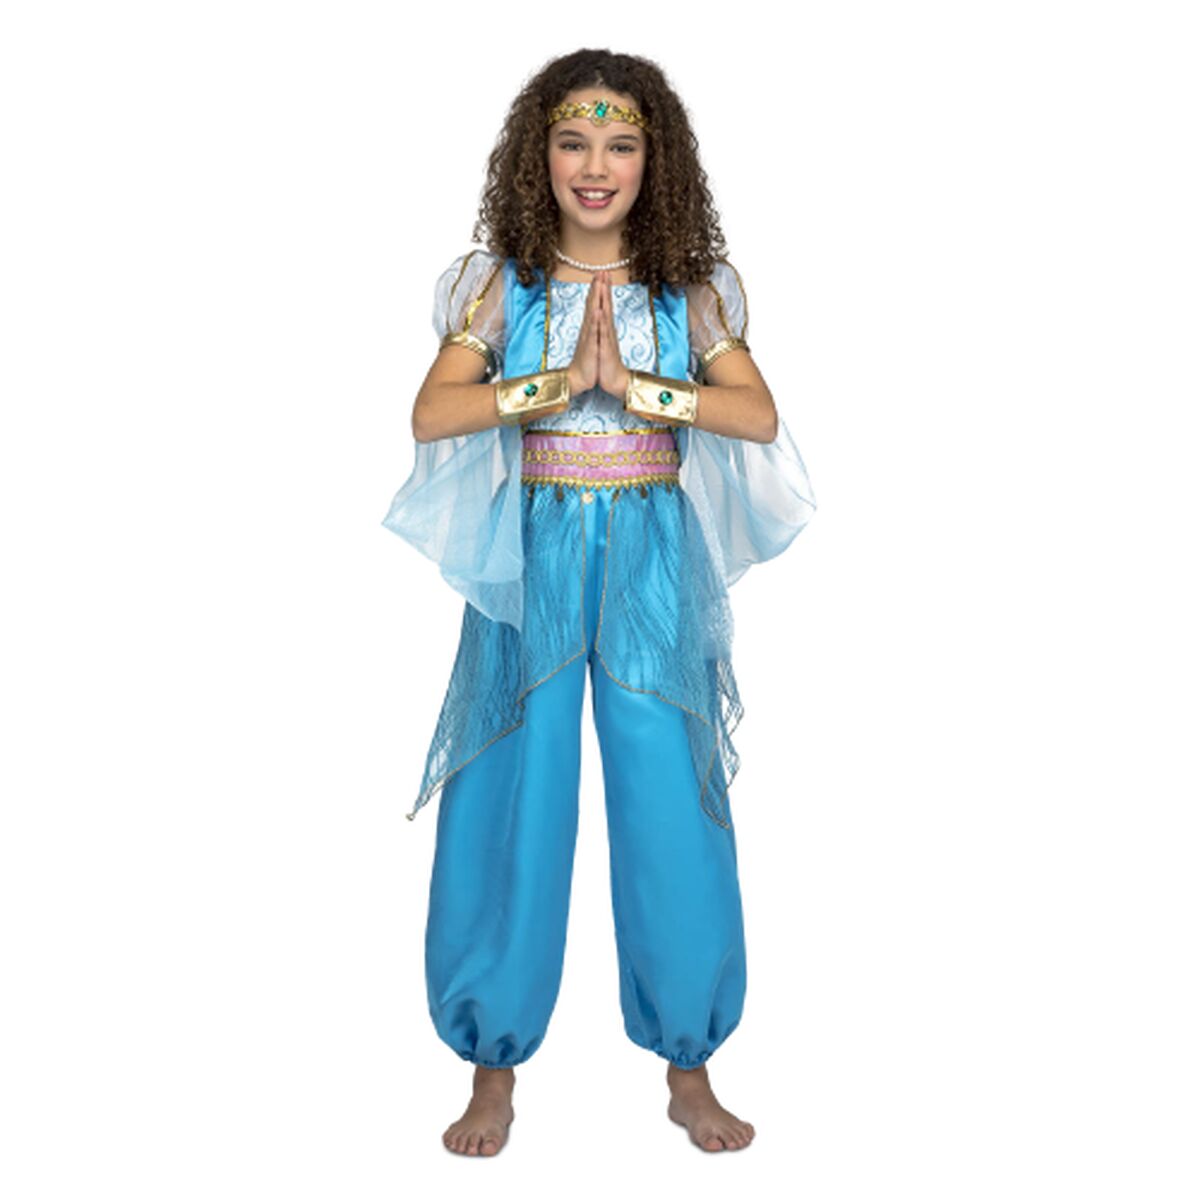 Costume for Children My Other Me Turquoise Arab Princess